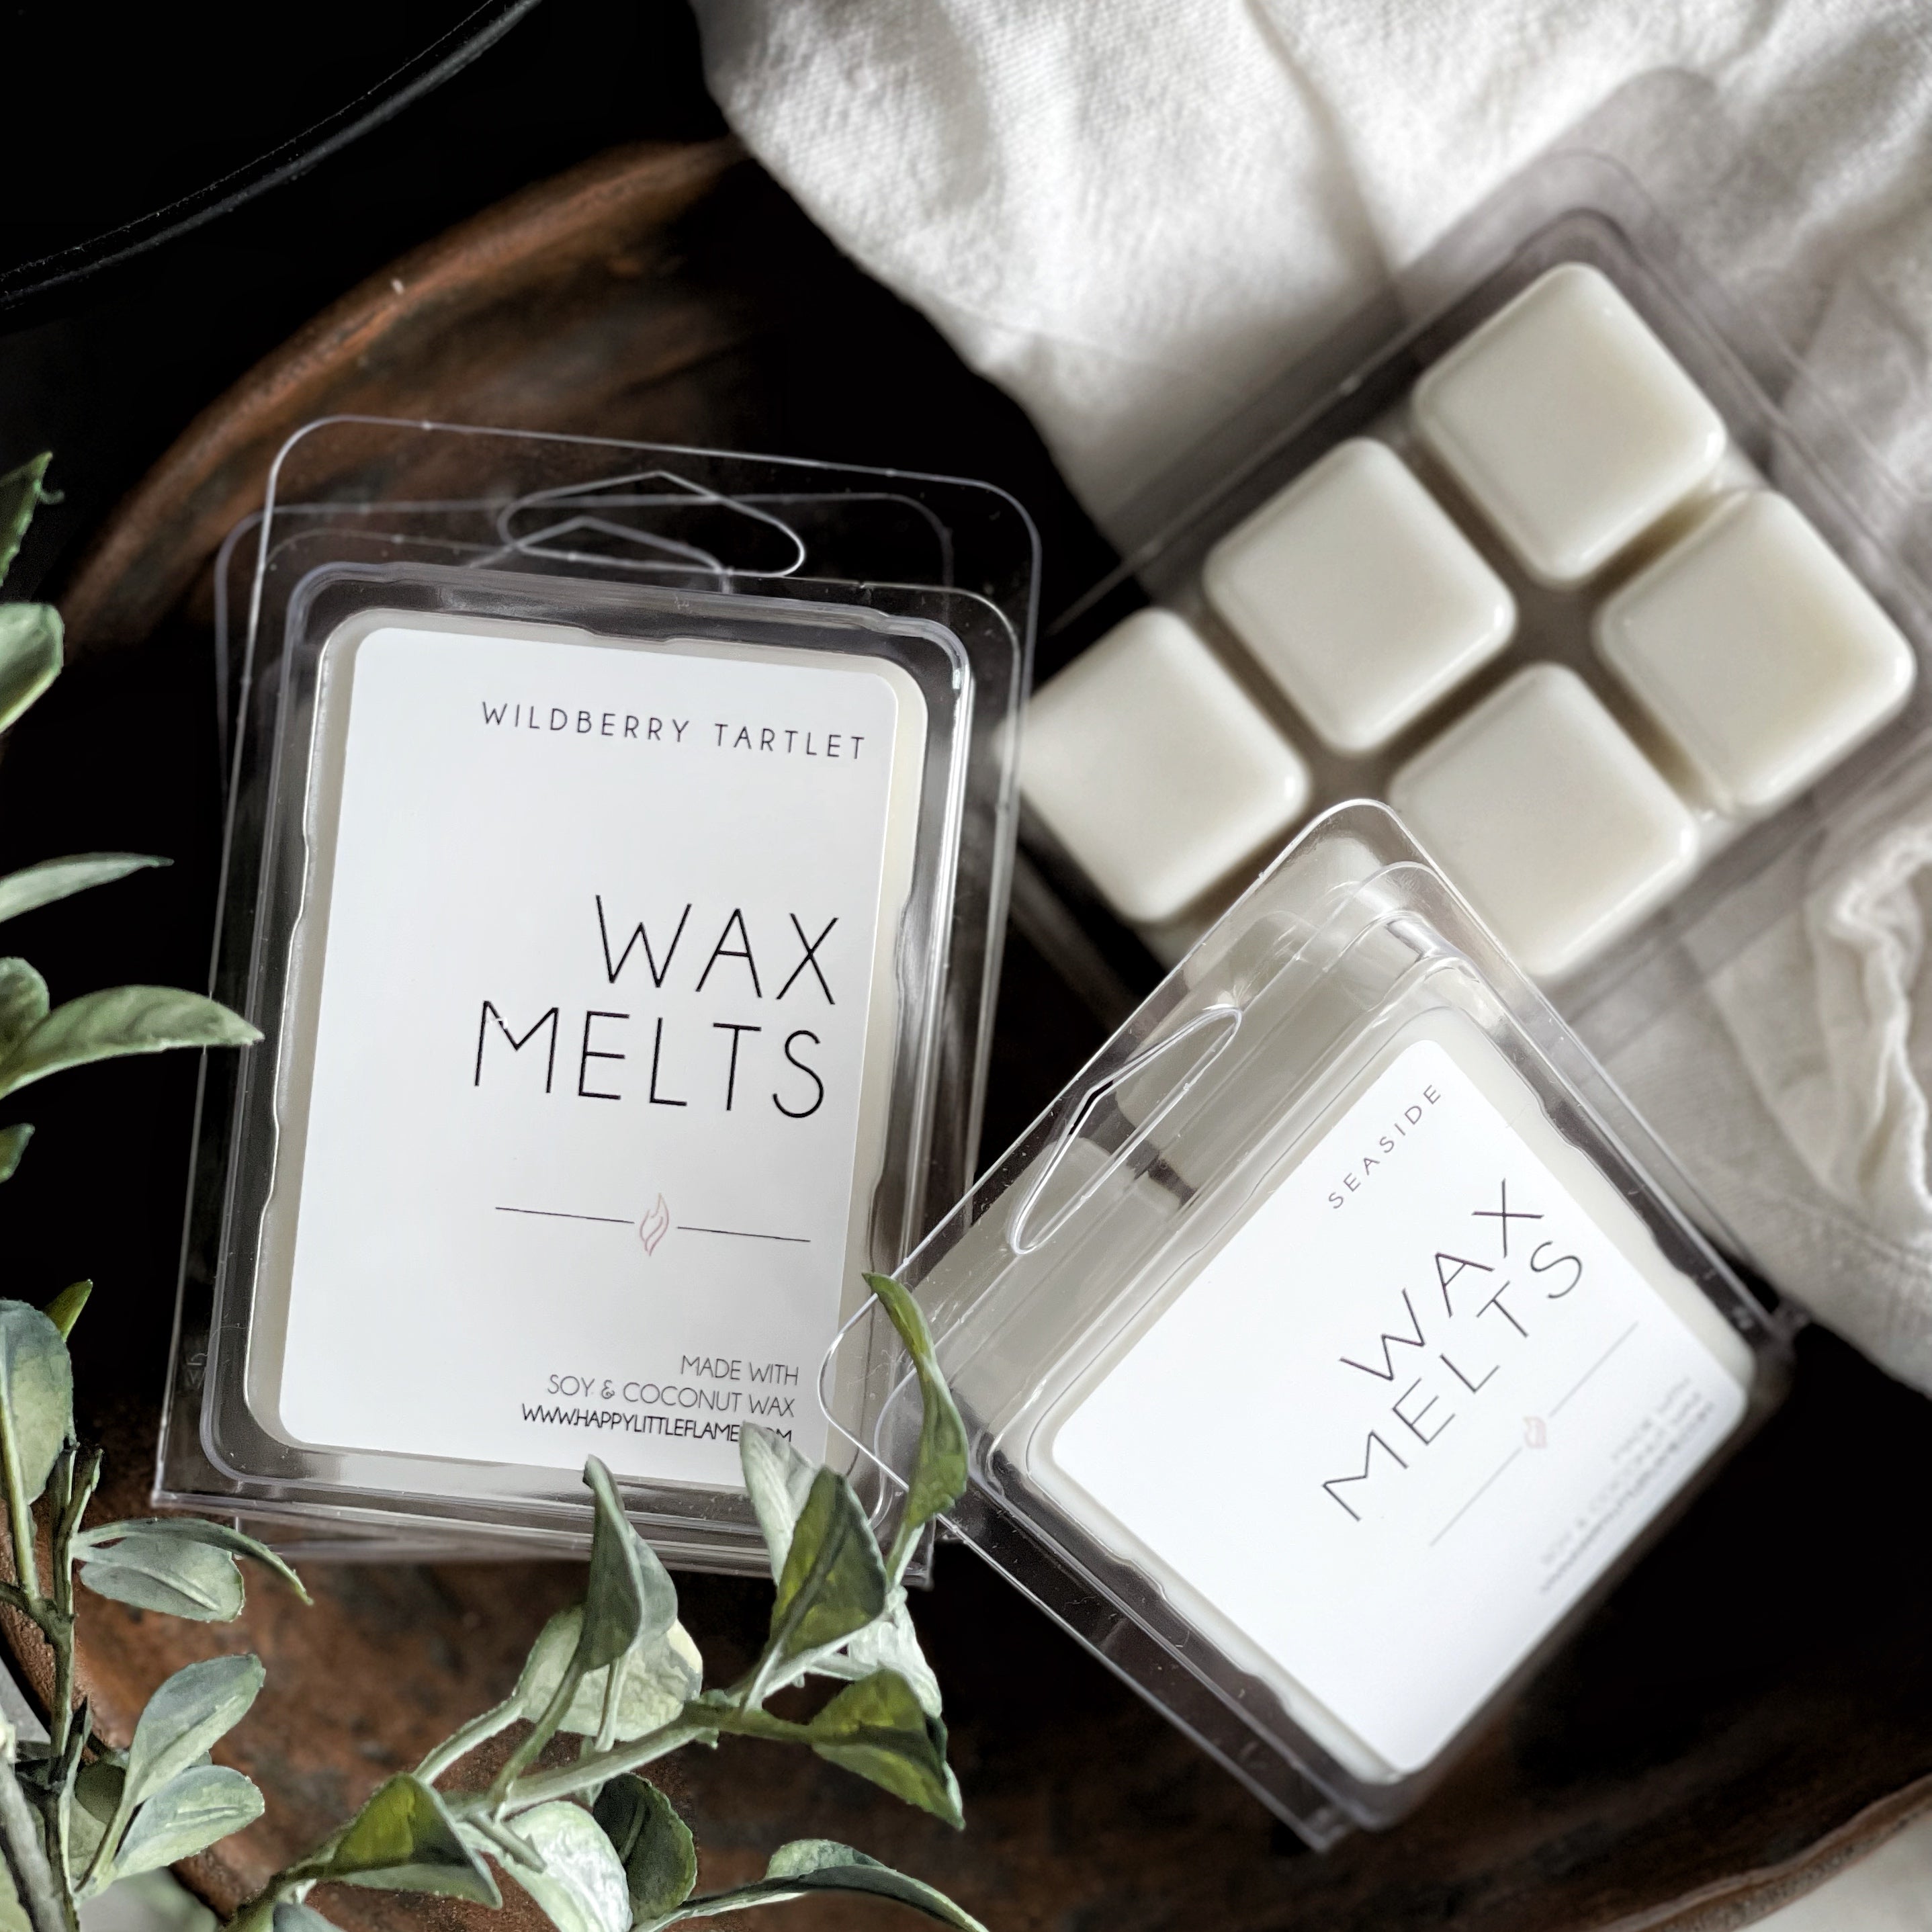  Coconut Wax Melts: 16 x 5g PCS Heart Shaped Scented Wax Melts  in a Presentation Gift Box, Vegan & Pet Friendly, Cruelty Free, Candle  Alternative : Beauty & Personal Care